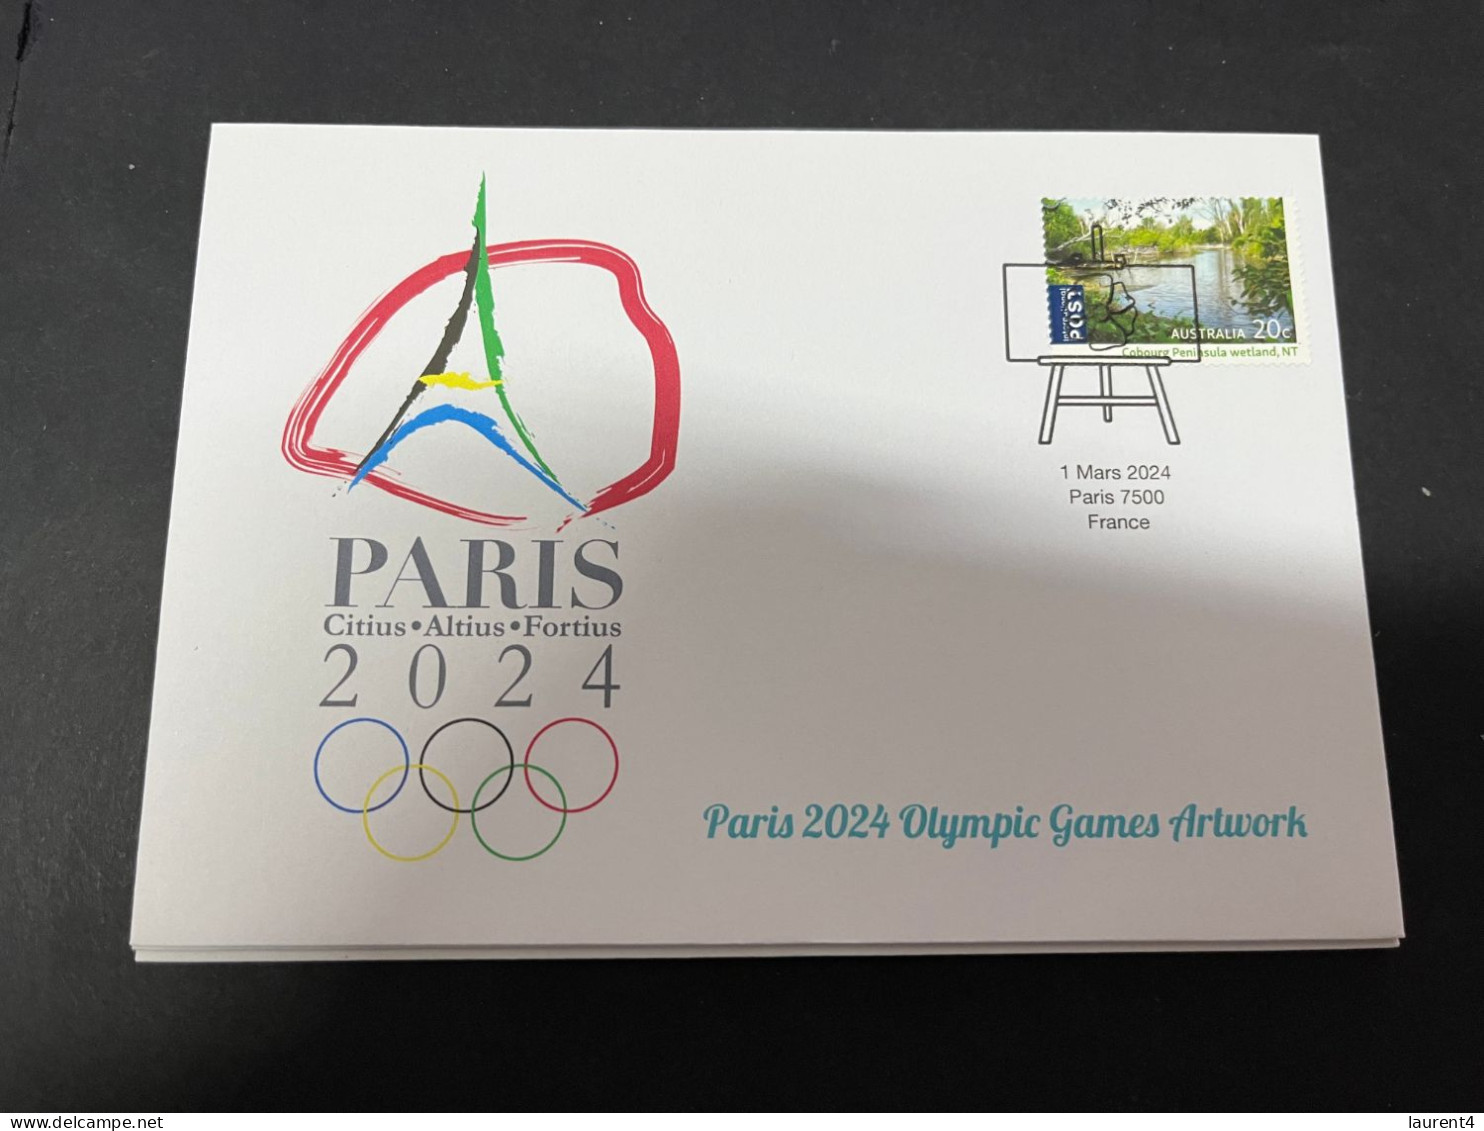 8-3-2024 (2 Y 30) Paris Olympic Games 2024 - 1 (of 12 Covers Series) For The Paris 2024 Olympic Games Artwork - Estate 2024 : Parigi